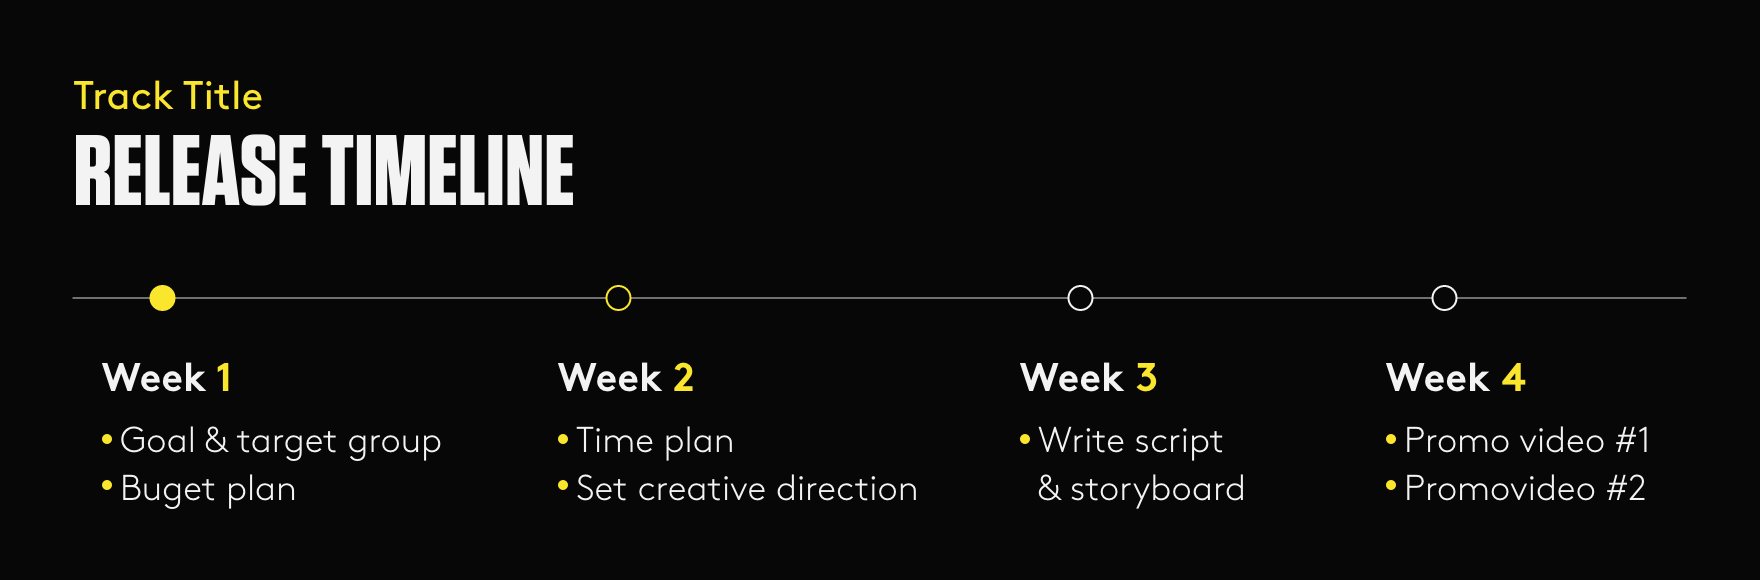 An artist release timeline in black, white, and yellow